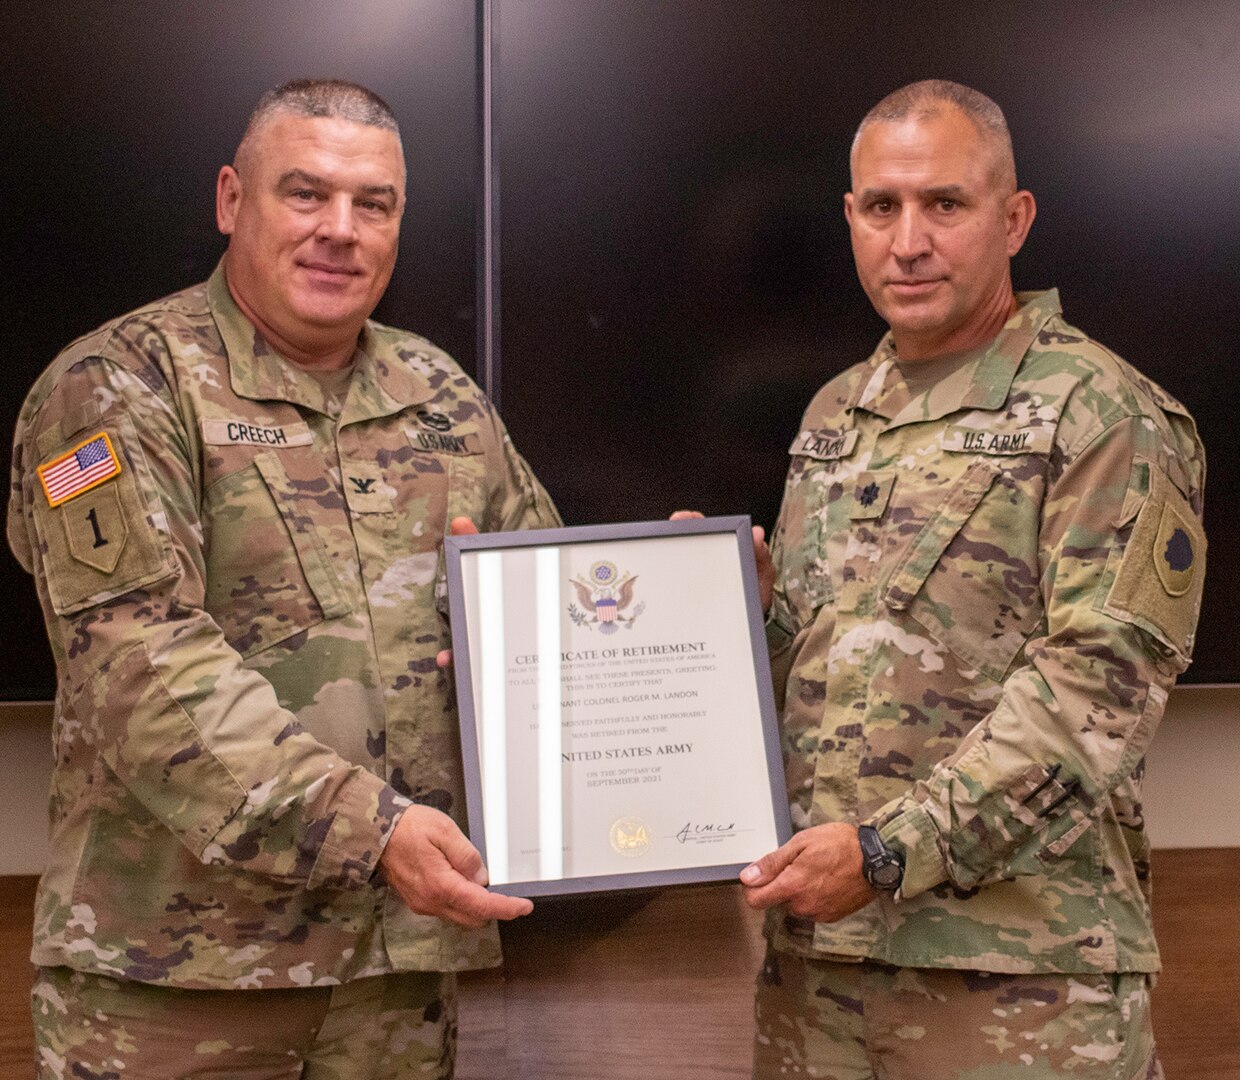 Lt. Col. Roger “Mike” Landon, of Petersburg, Illinois, accepts the Certificate of Retirement from Col. Brian Creech, of Petersburg, Illinois, U.S. Property and Fiscal Officer for Illinois, during Landon’s retirement ceremony Sept. 30 at the Joint Force Headquarters, Camp Lincoln, Springfield, Illinois.